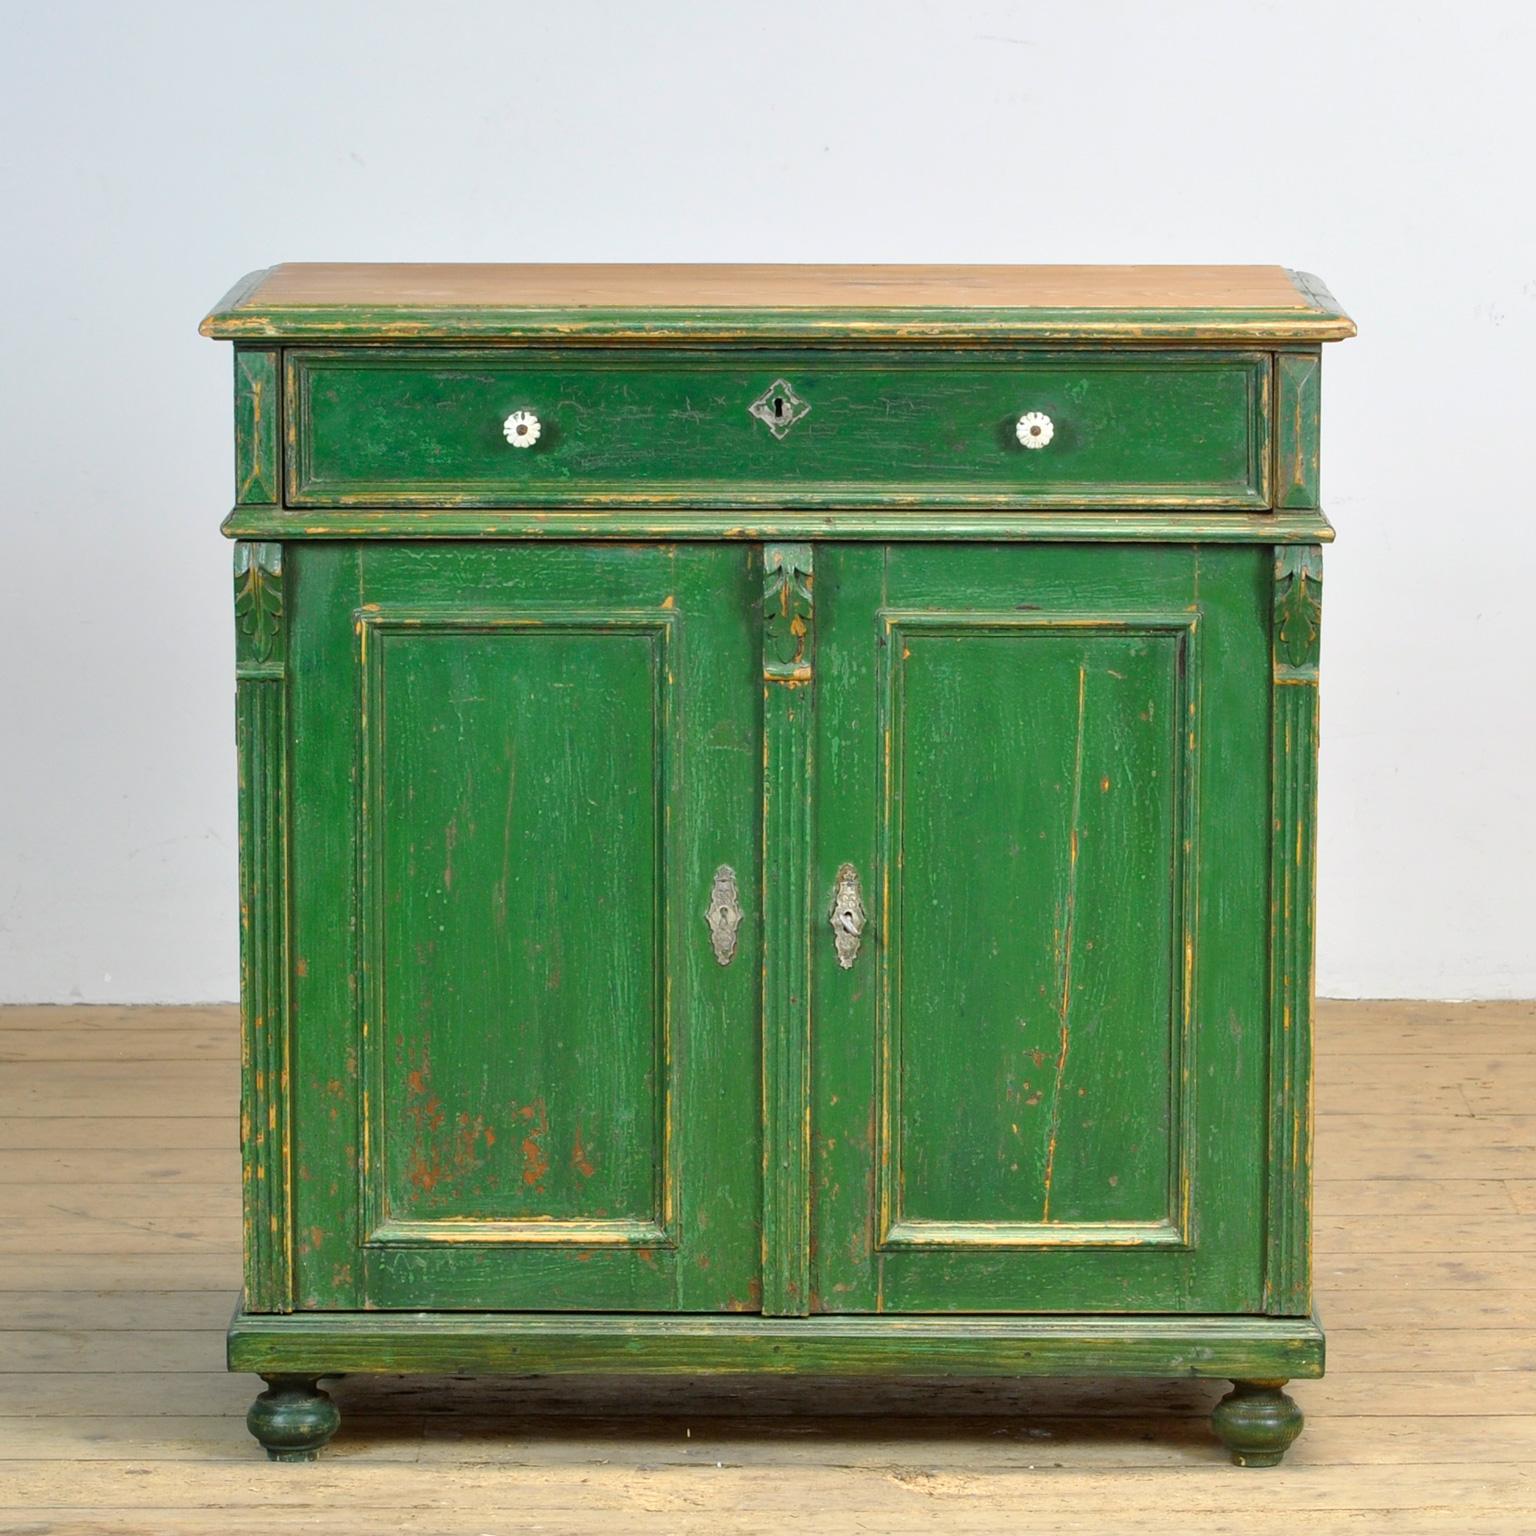 Pine dresser from circa 1900. Made of pine wood. The cabinet has its original paint with a nice patina. The dresser has a well-functioning lock with key. The cabinet has been cleaned and treated against woodworm. A beautiful and practical piece of